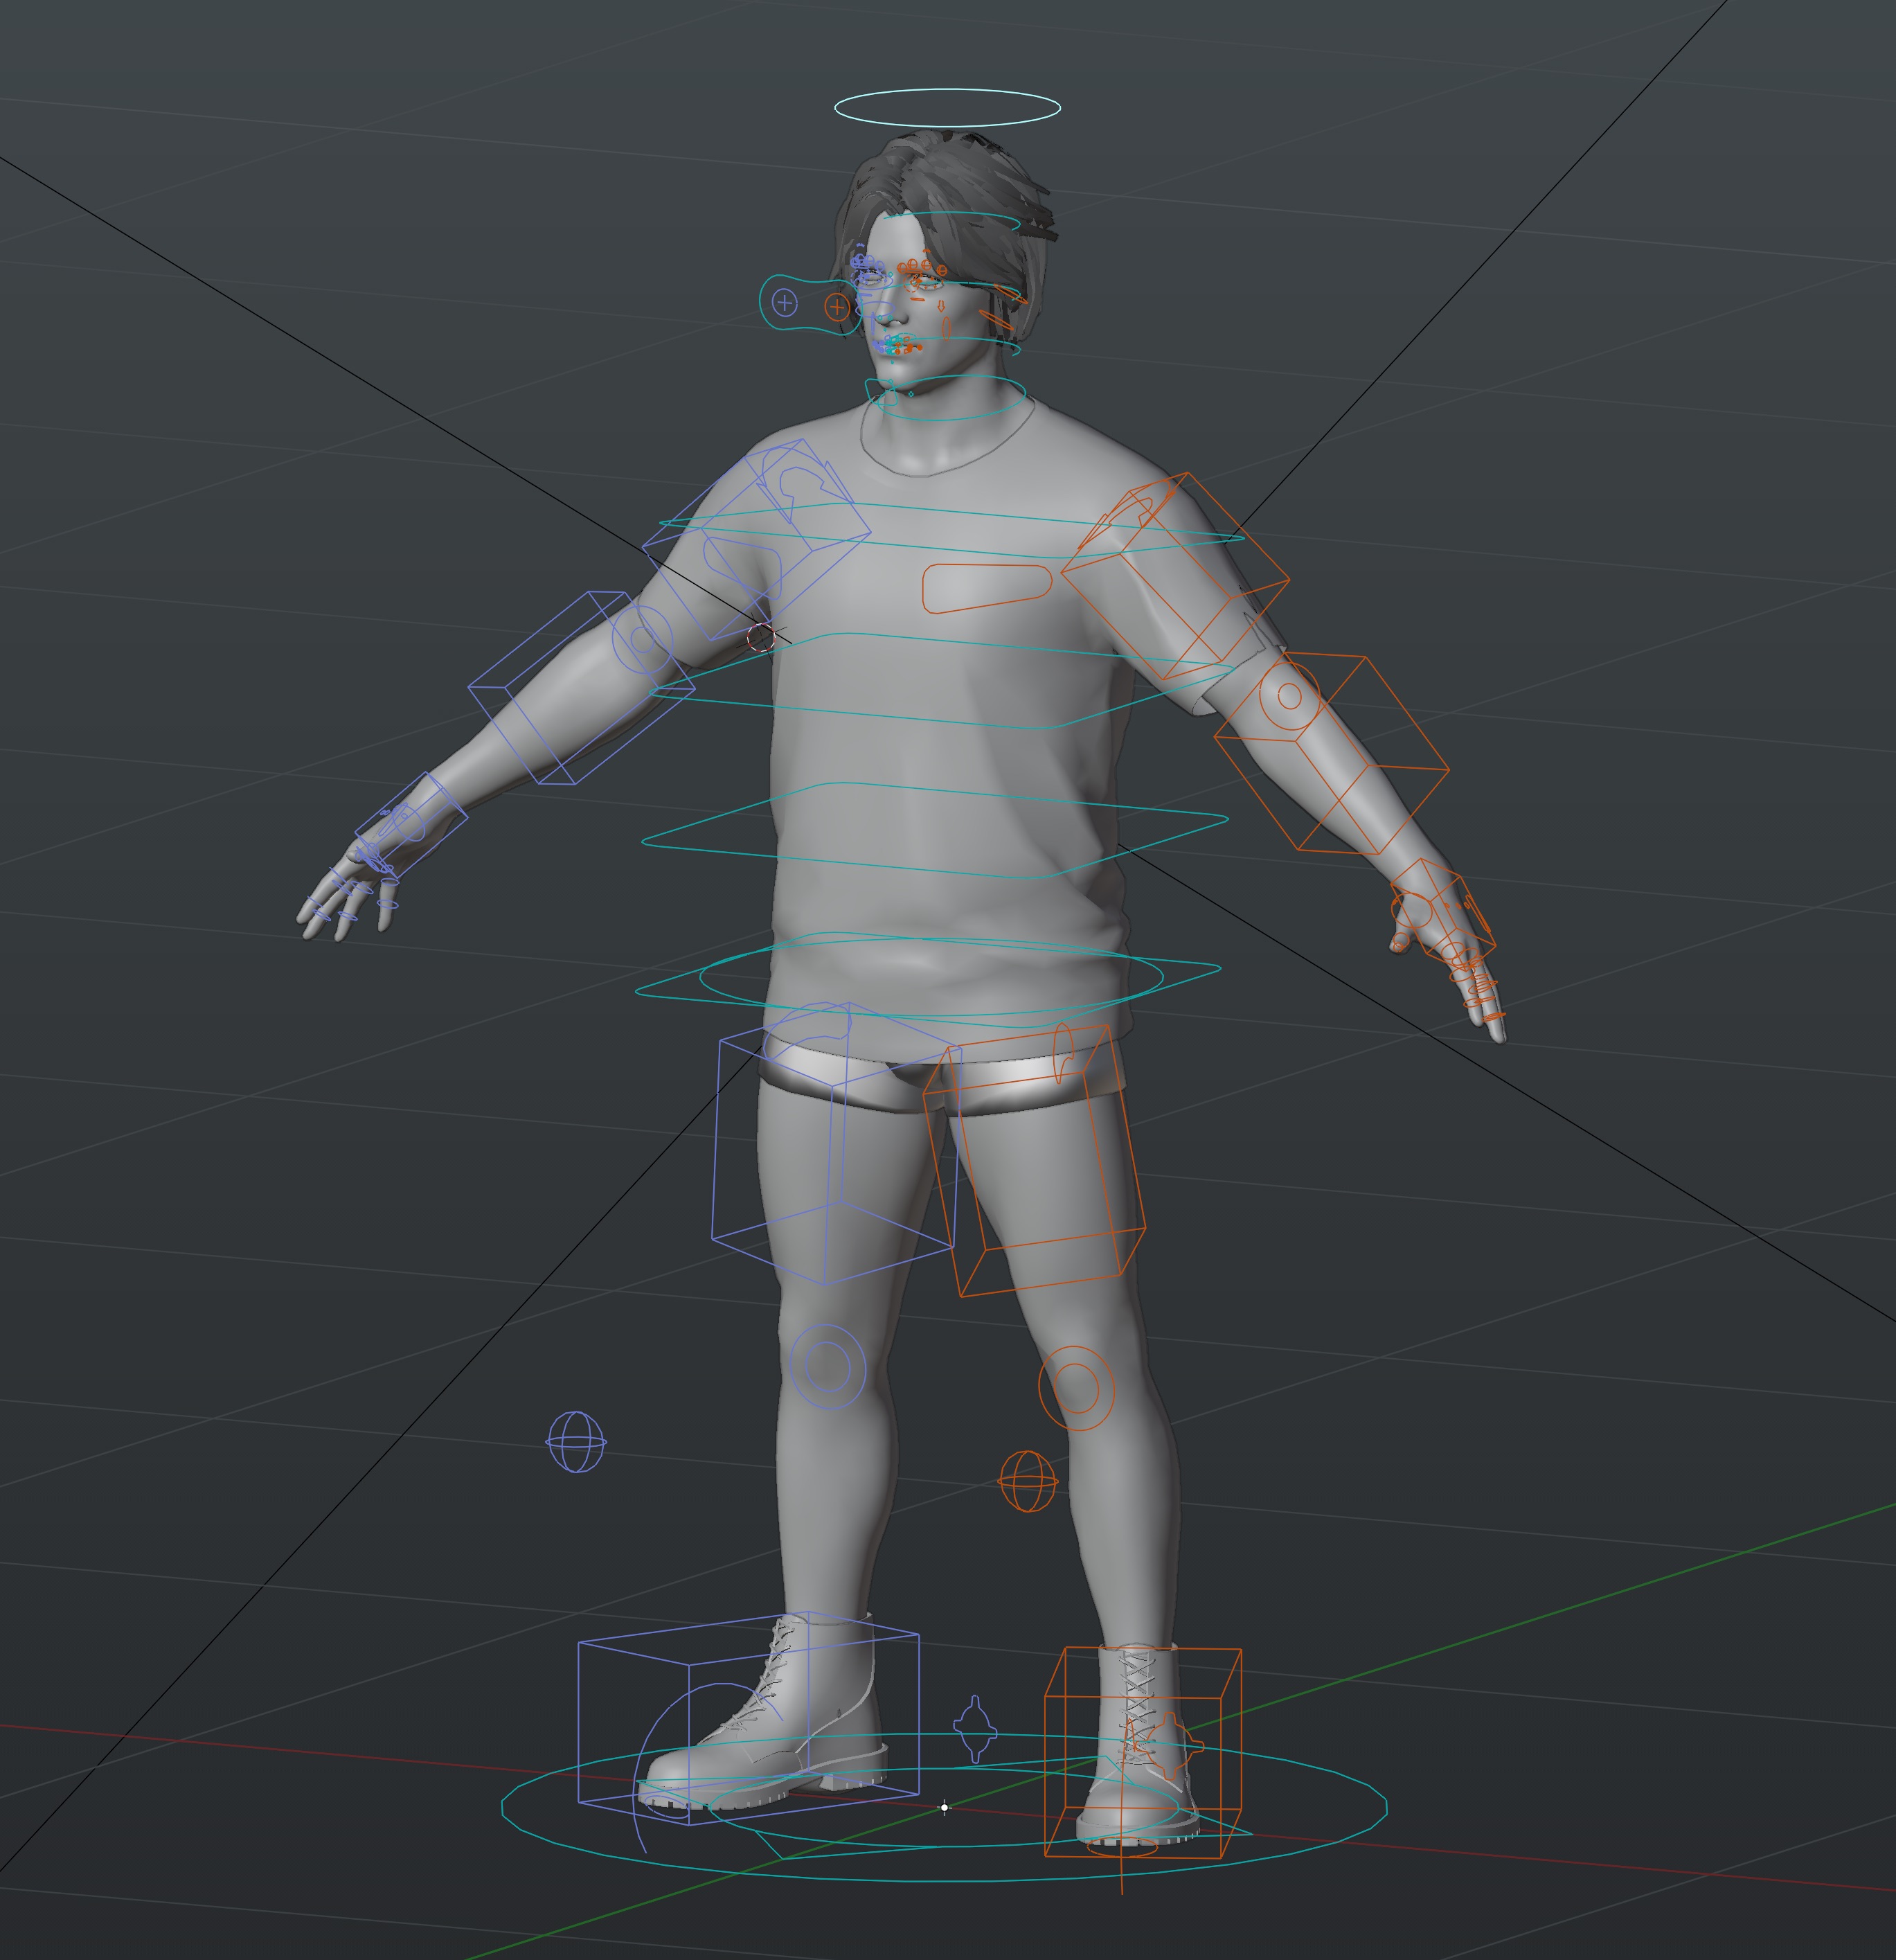 A screenshot of a 3D male character model in Blender.